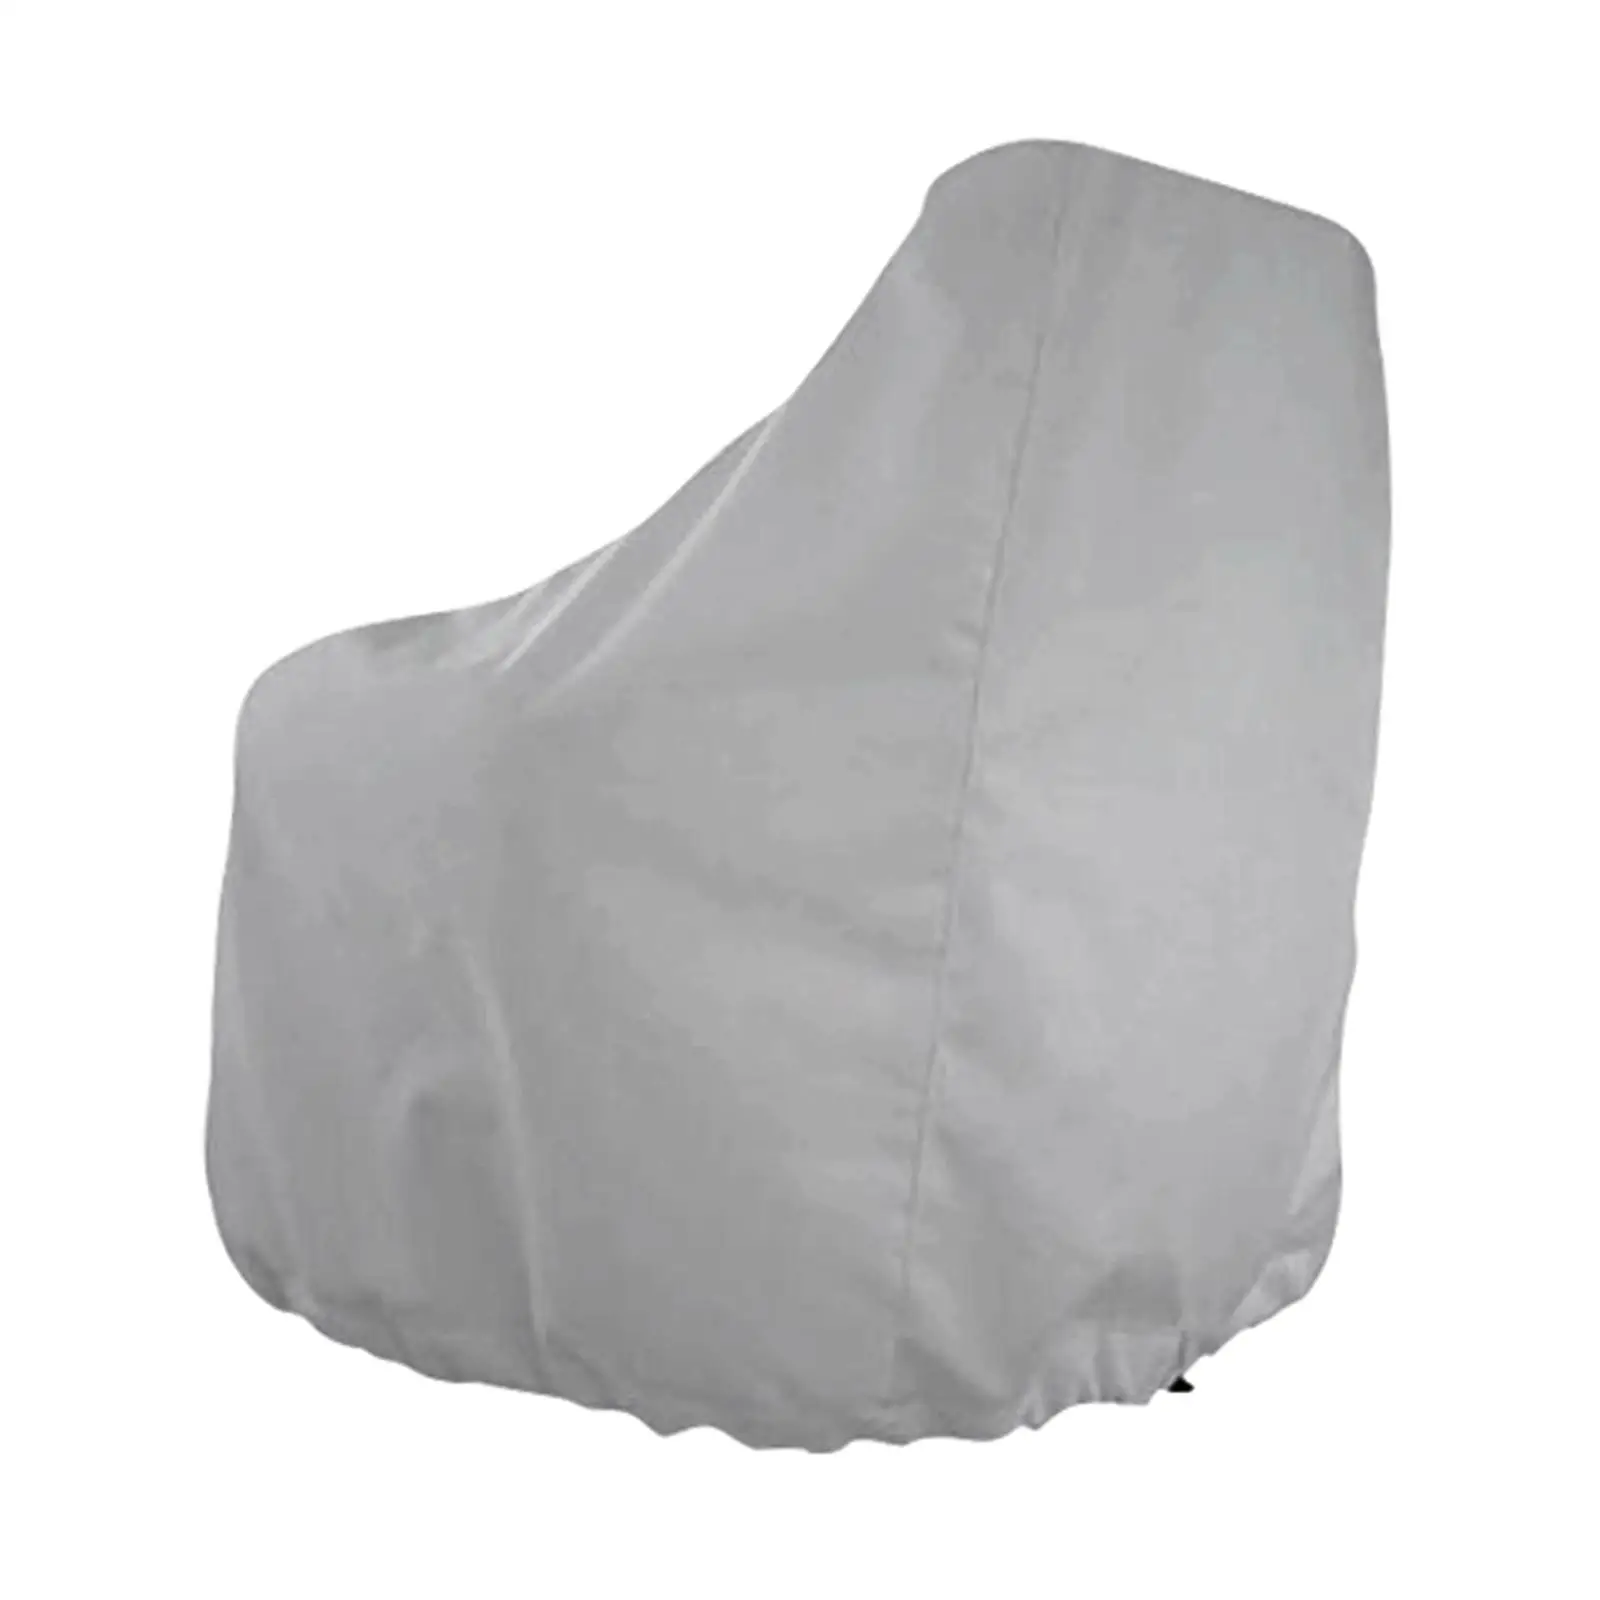 2 Pieces  Boat Seat Cover Outdoor Yacht Waterproof  Protections